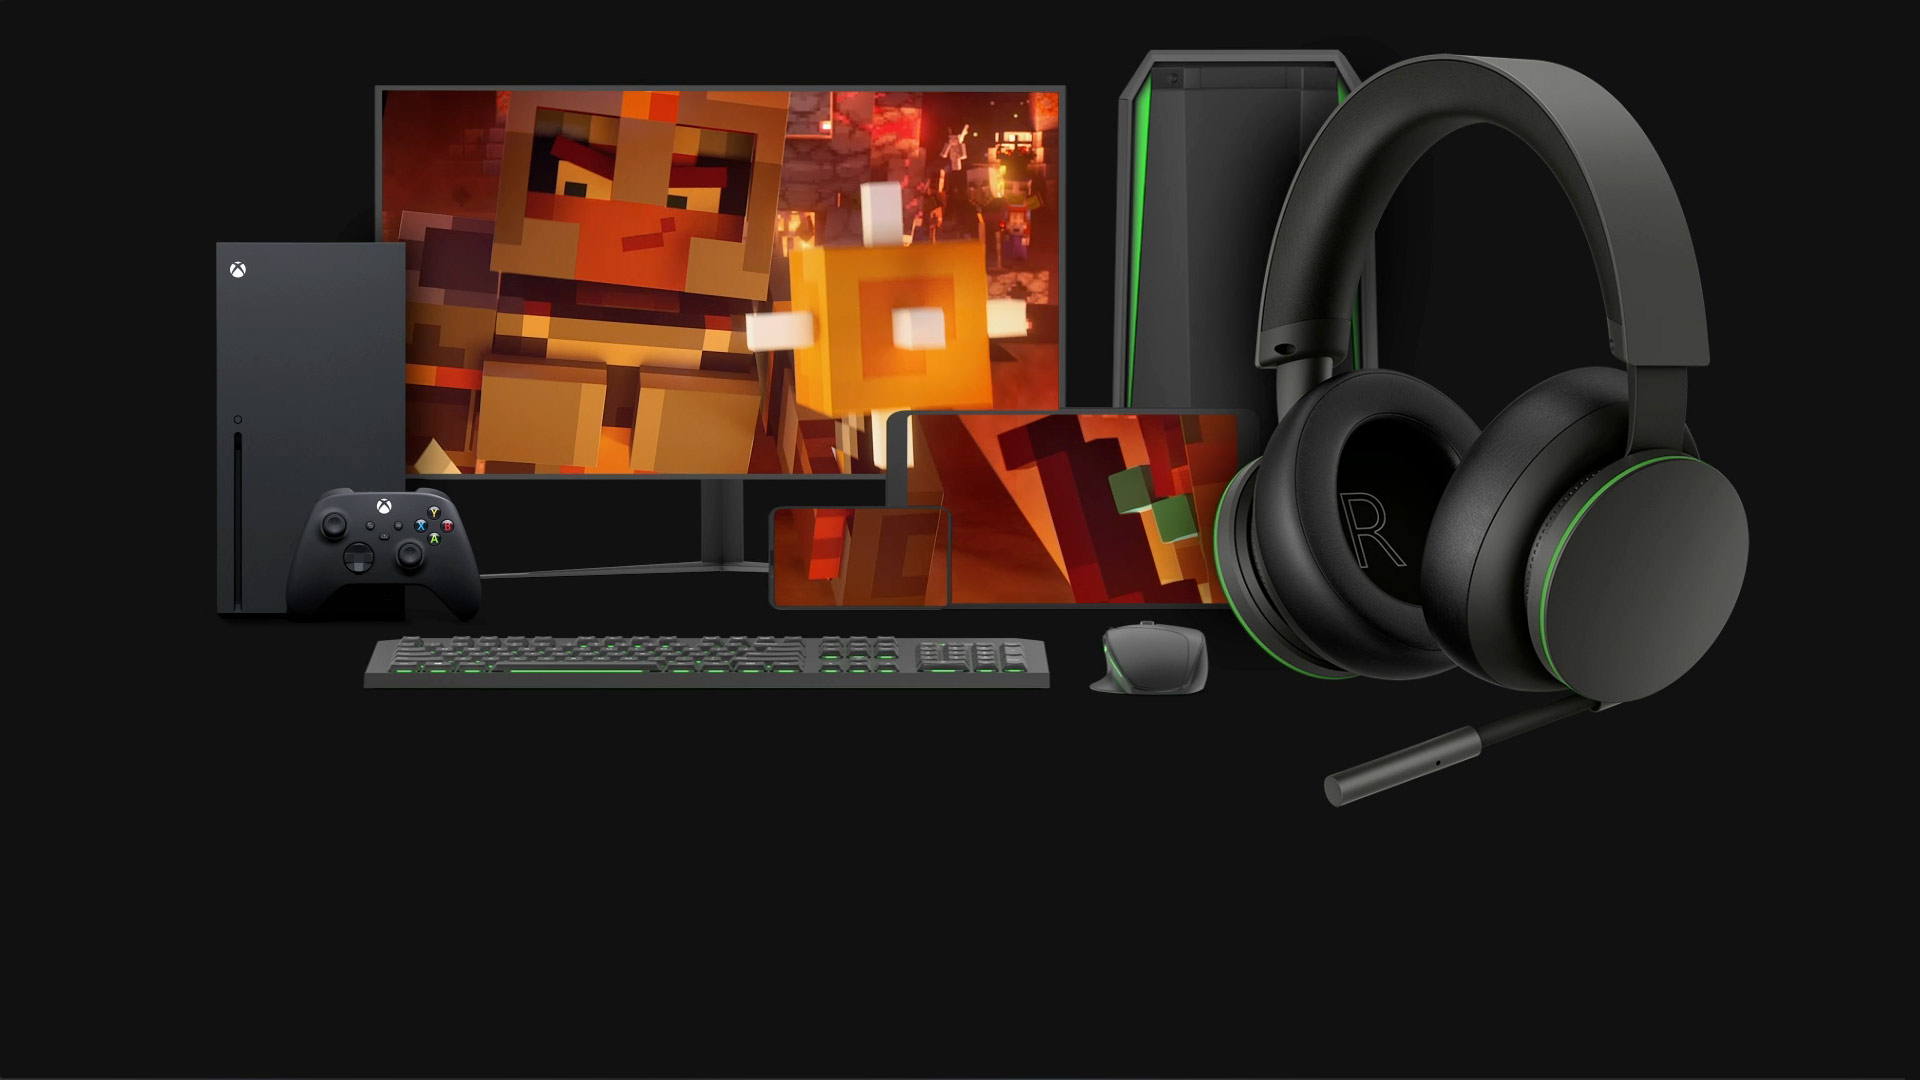 The Xbox Stereo Headset sits in front of a selection of devices it is compatible with, including the Xbox Series X, Windows PC and a mobile device.